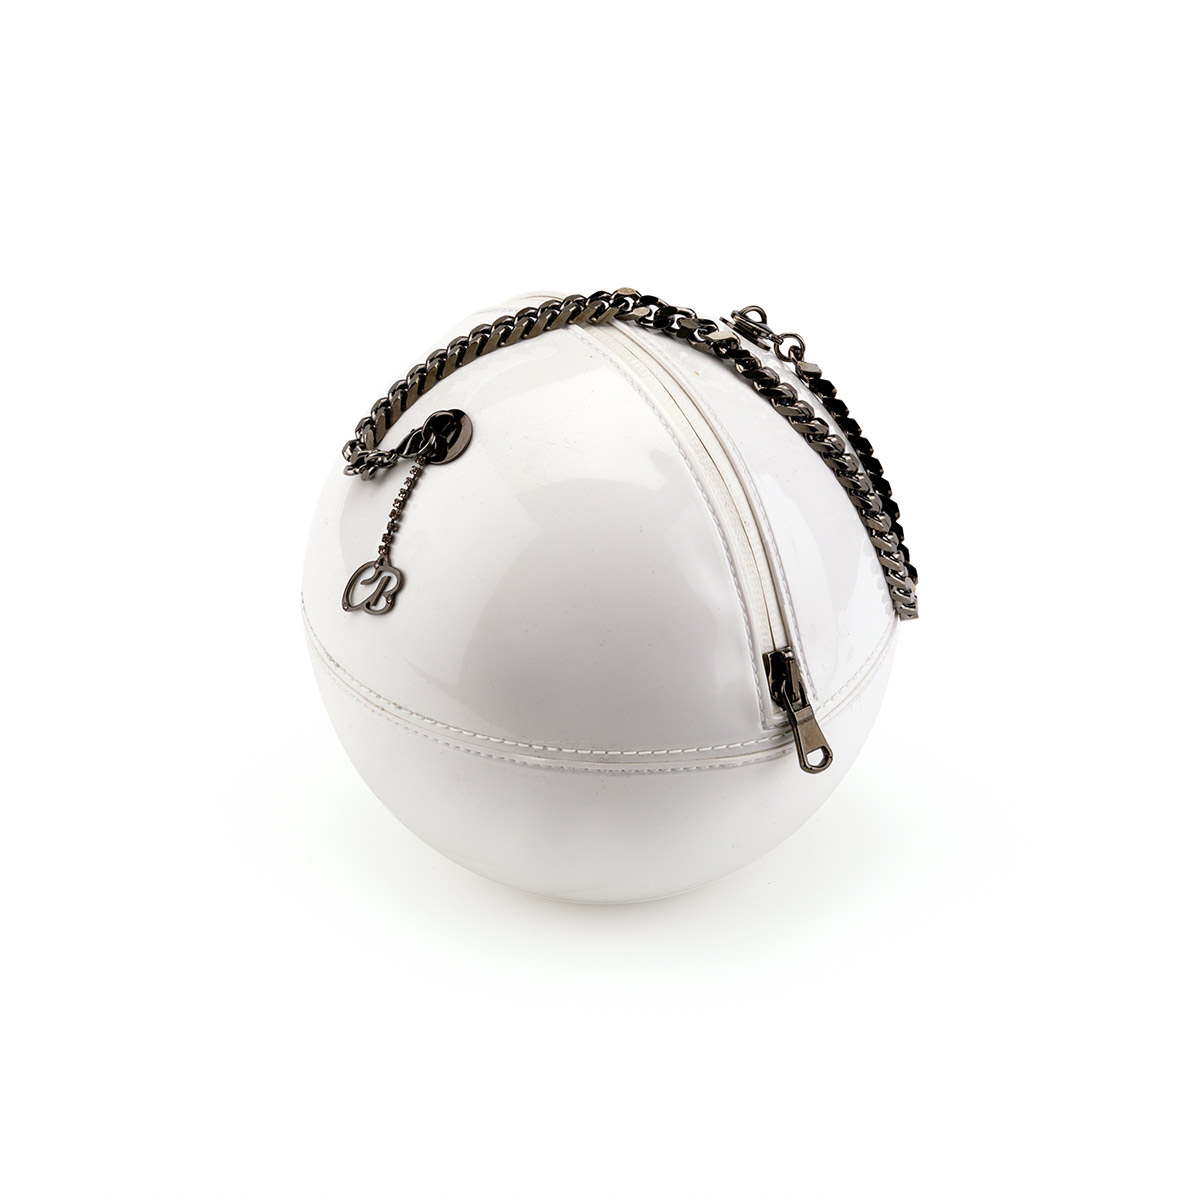 Pvc Sphere Bag with chain and pendant